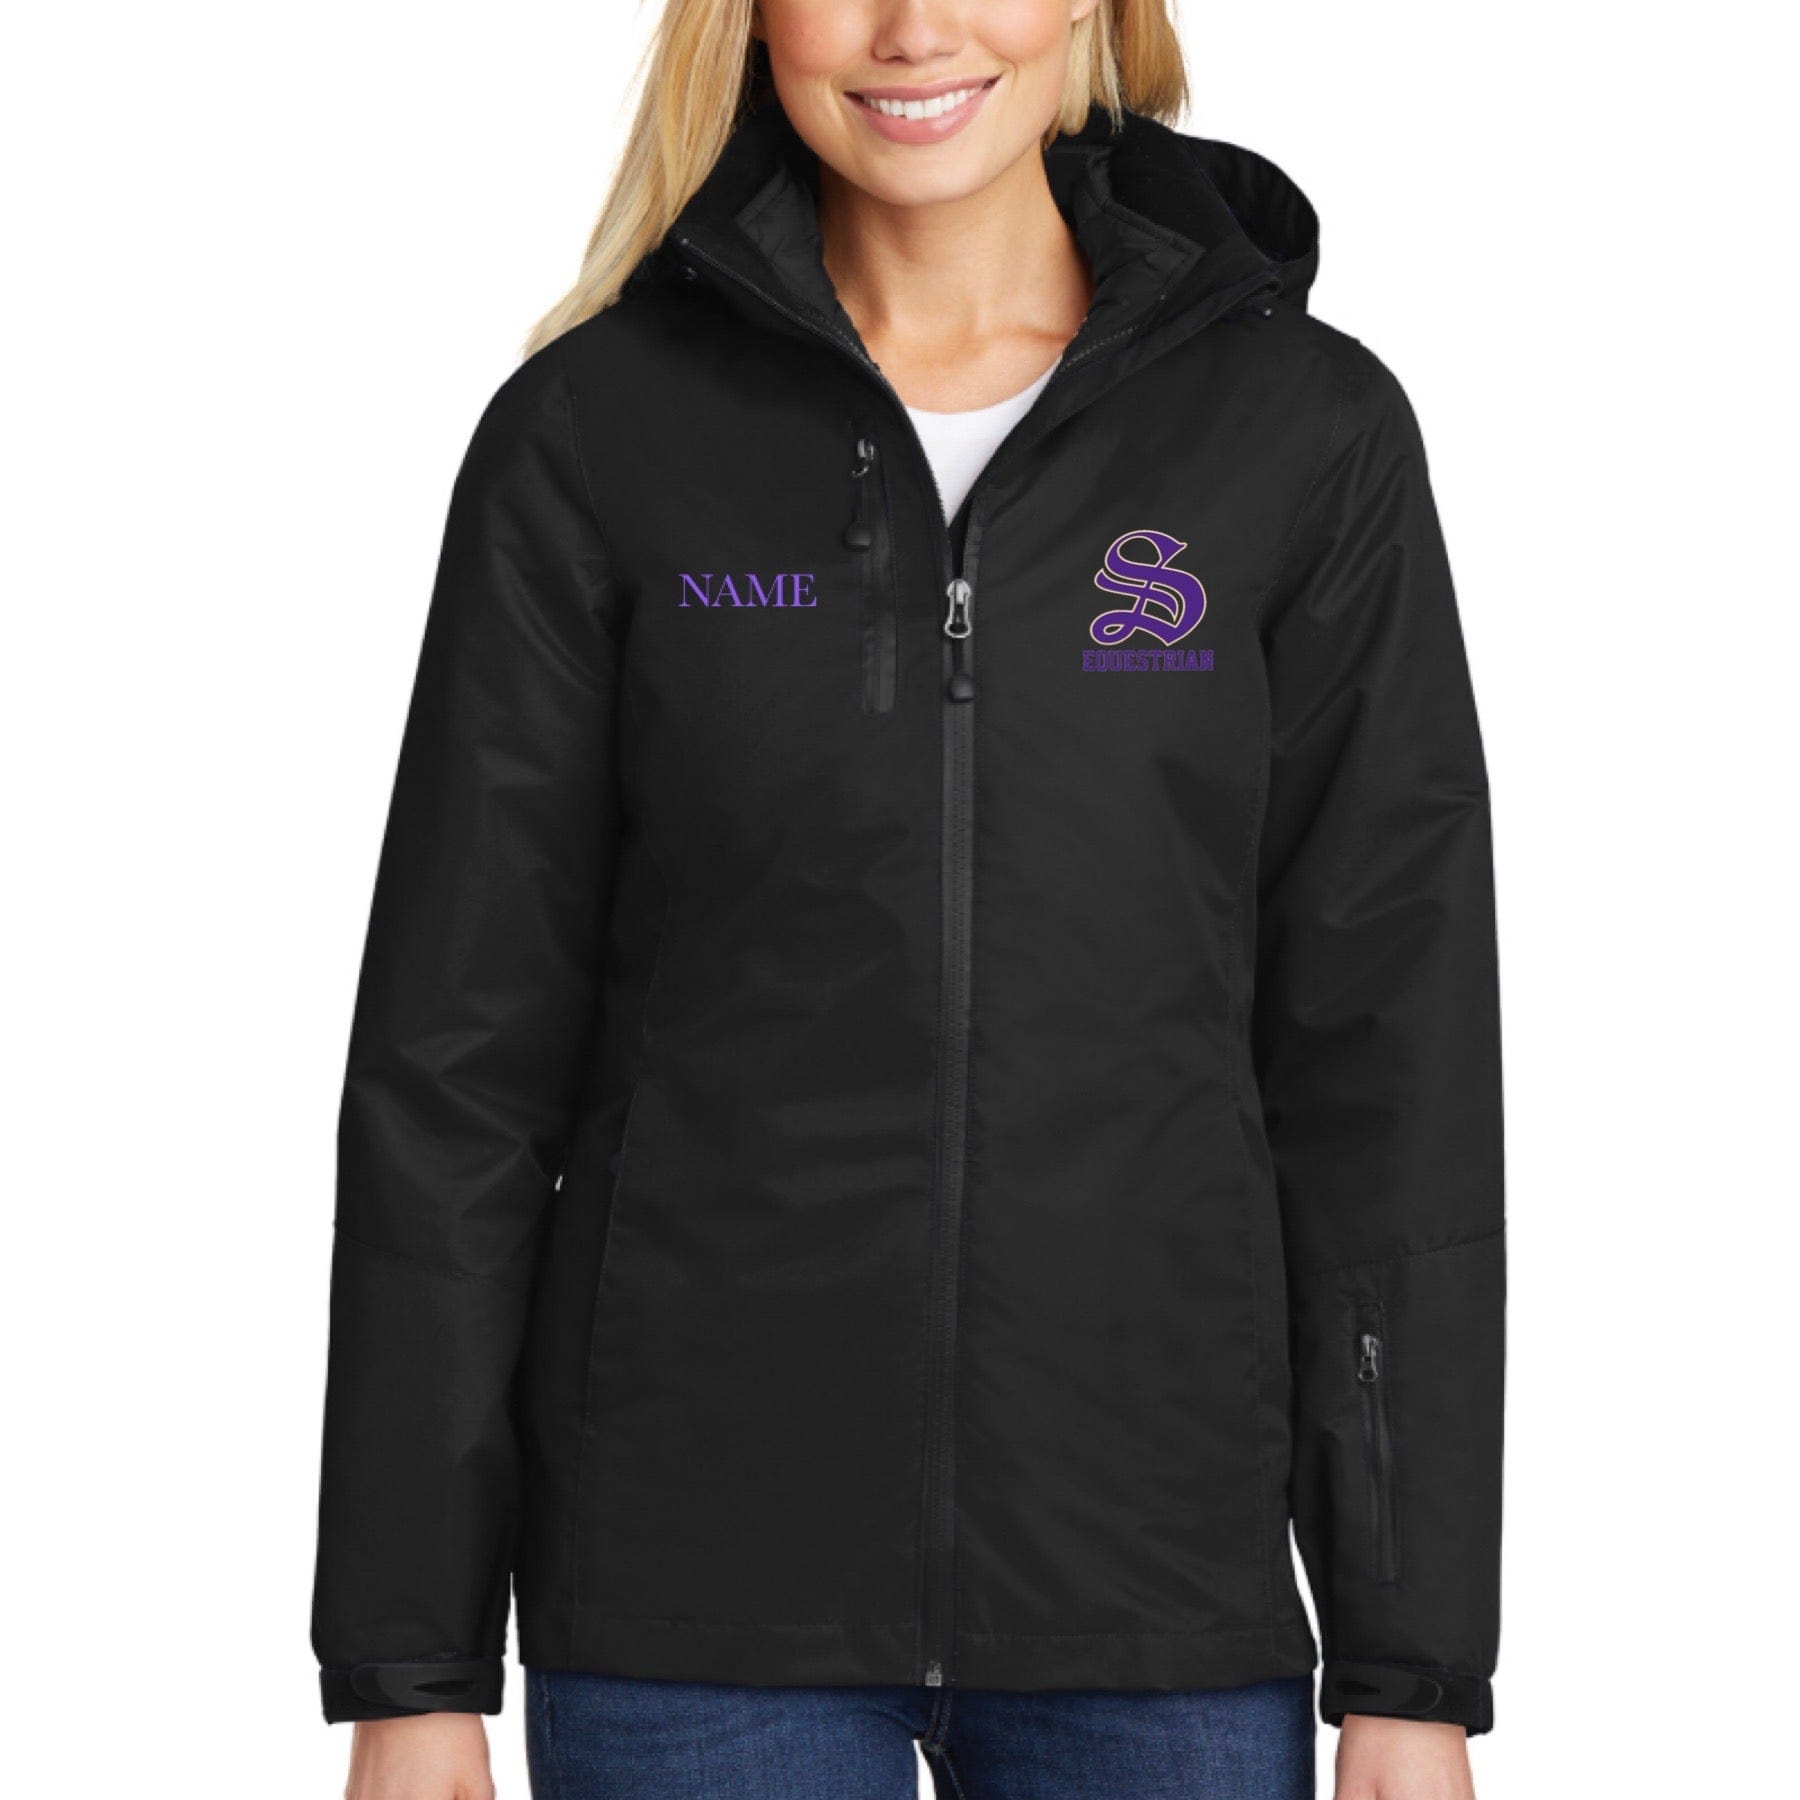 Equestrian Team Apparel Sewanee College 3in1 Coat equestrian team apparel online tack store mobile tack store custom farm apparel custom show stable clothing equestrian lifestyle horse show clothing riding clothes horses equestrian tack store